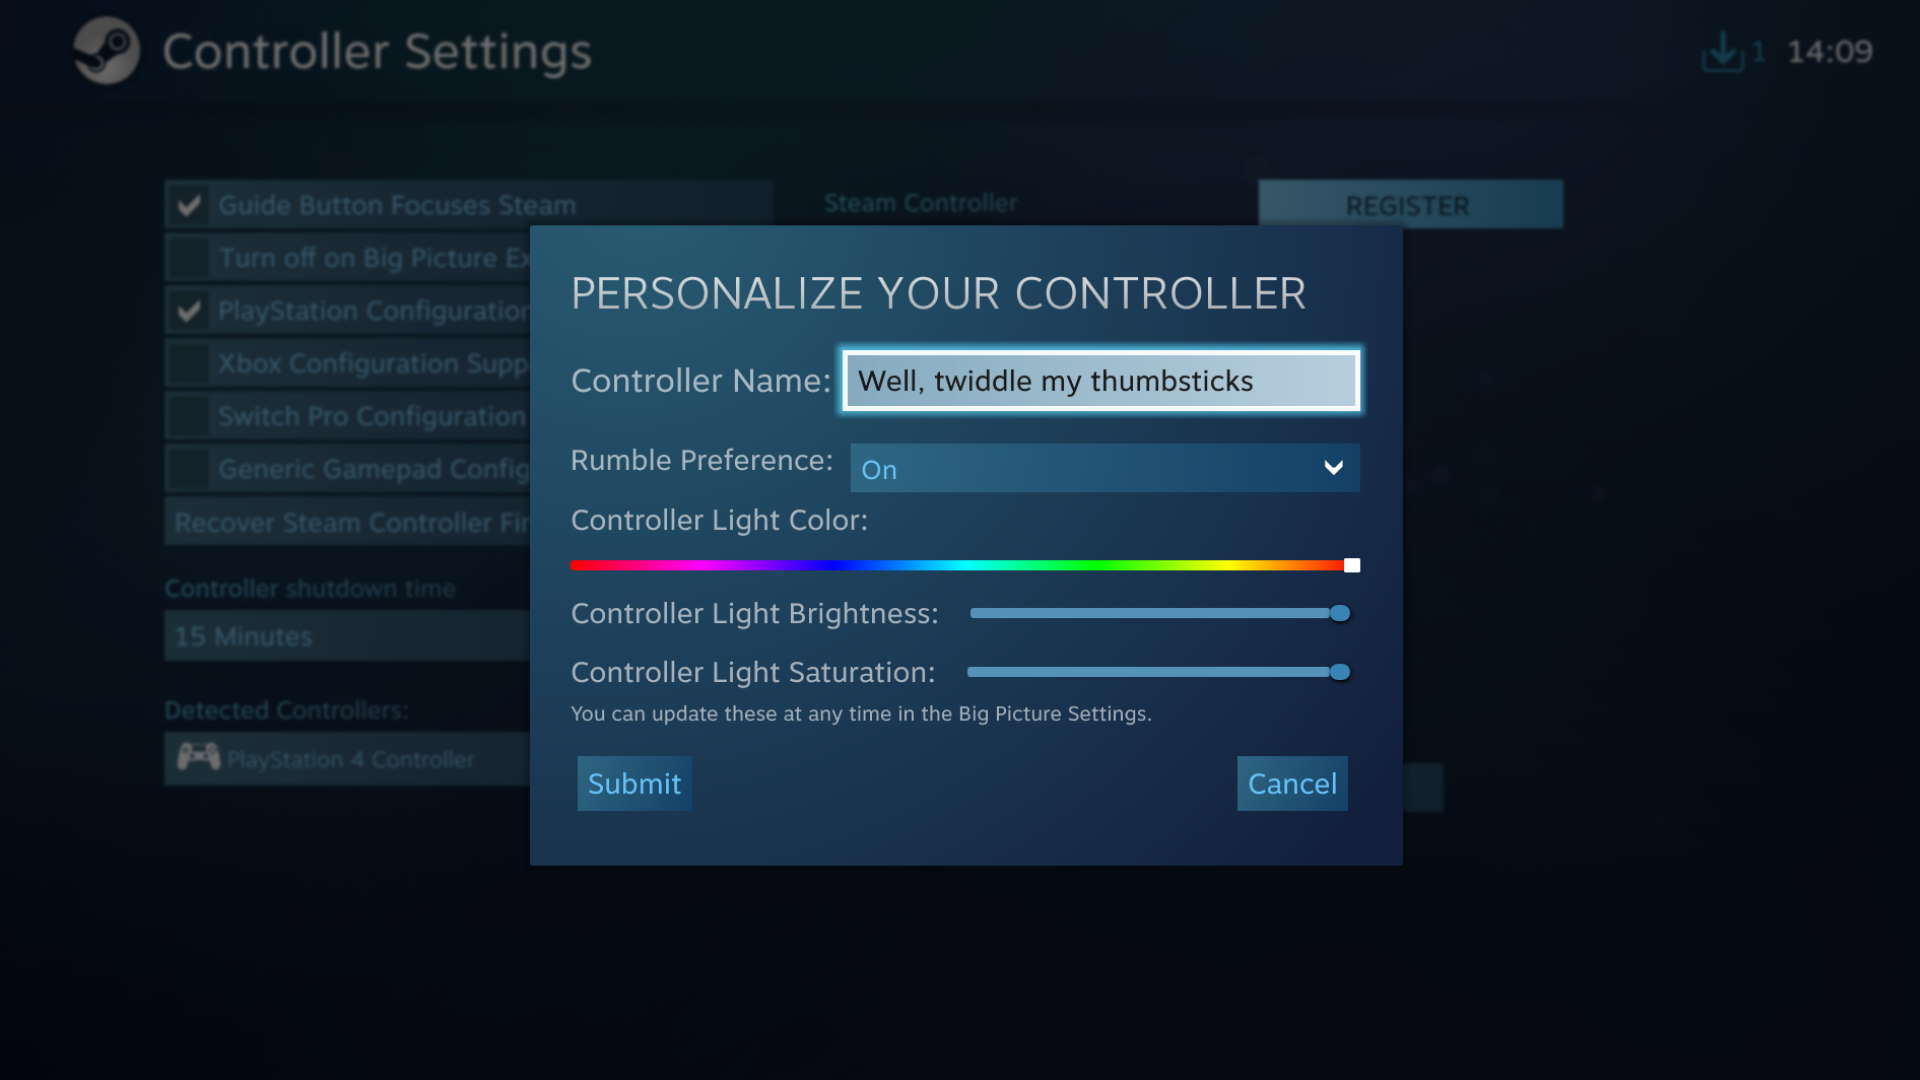 Personalize your controller menu in Steam